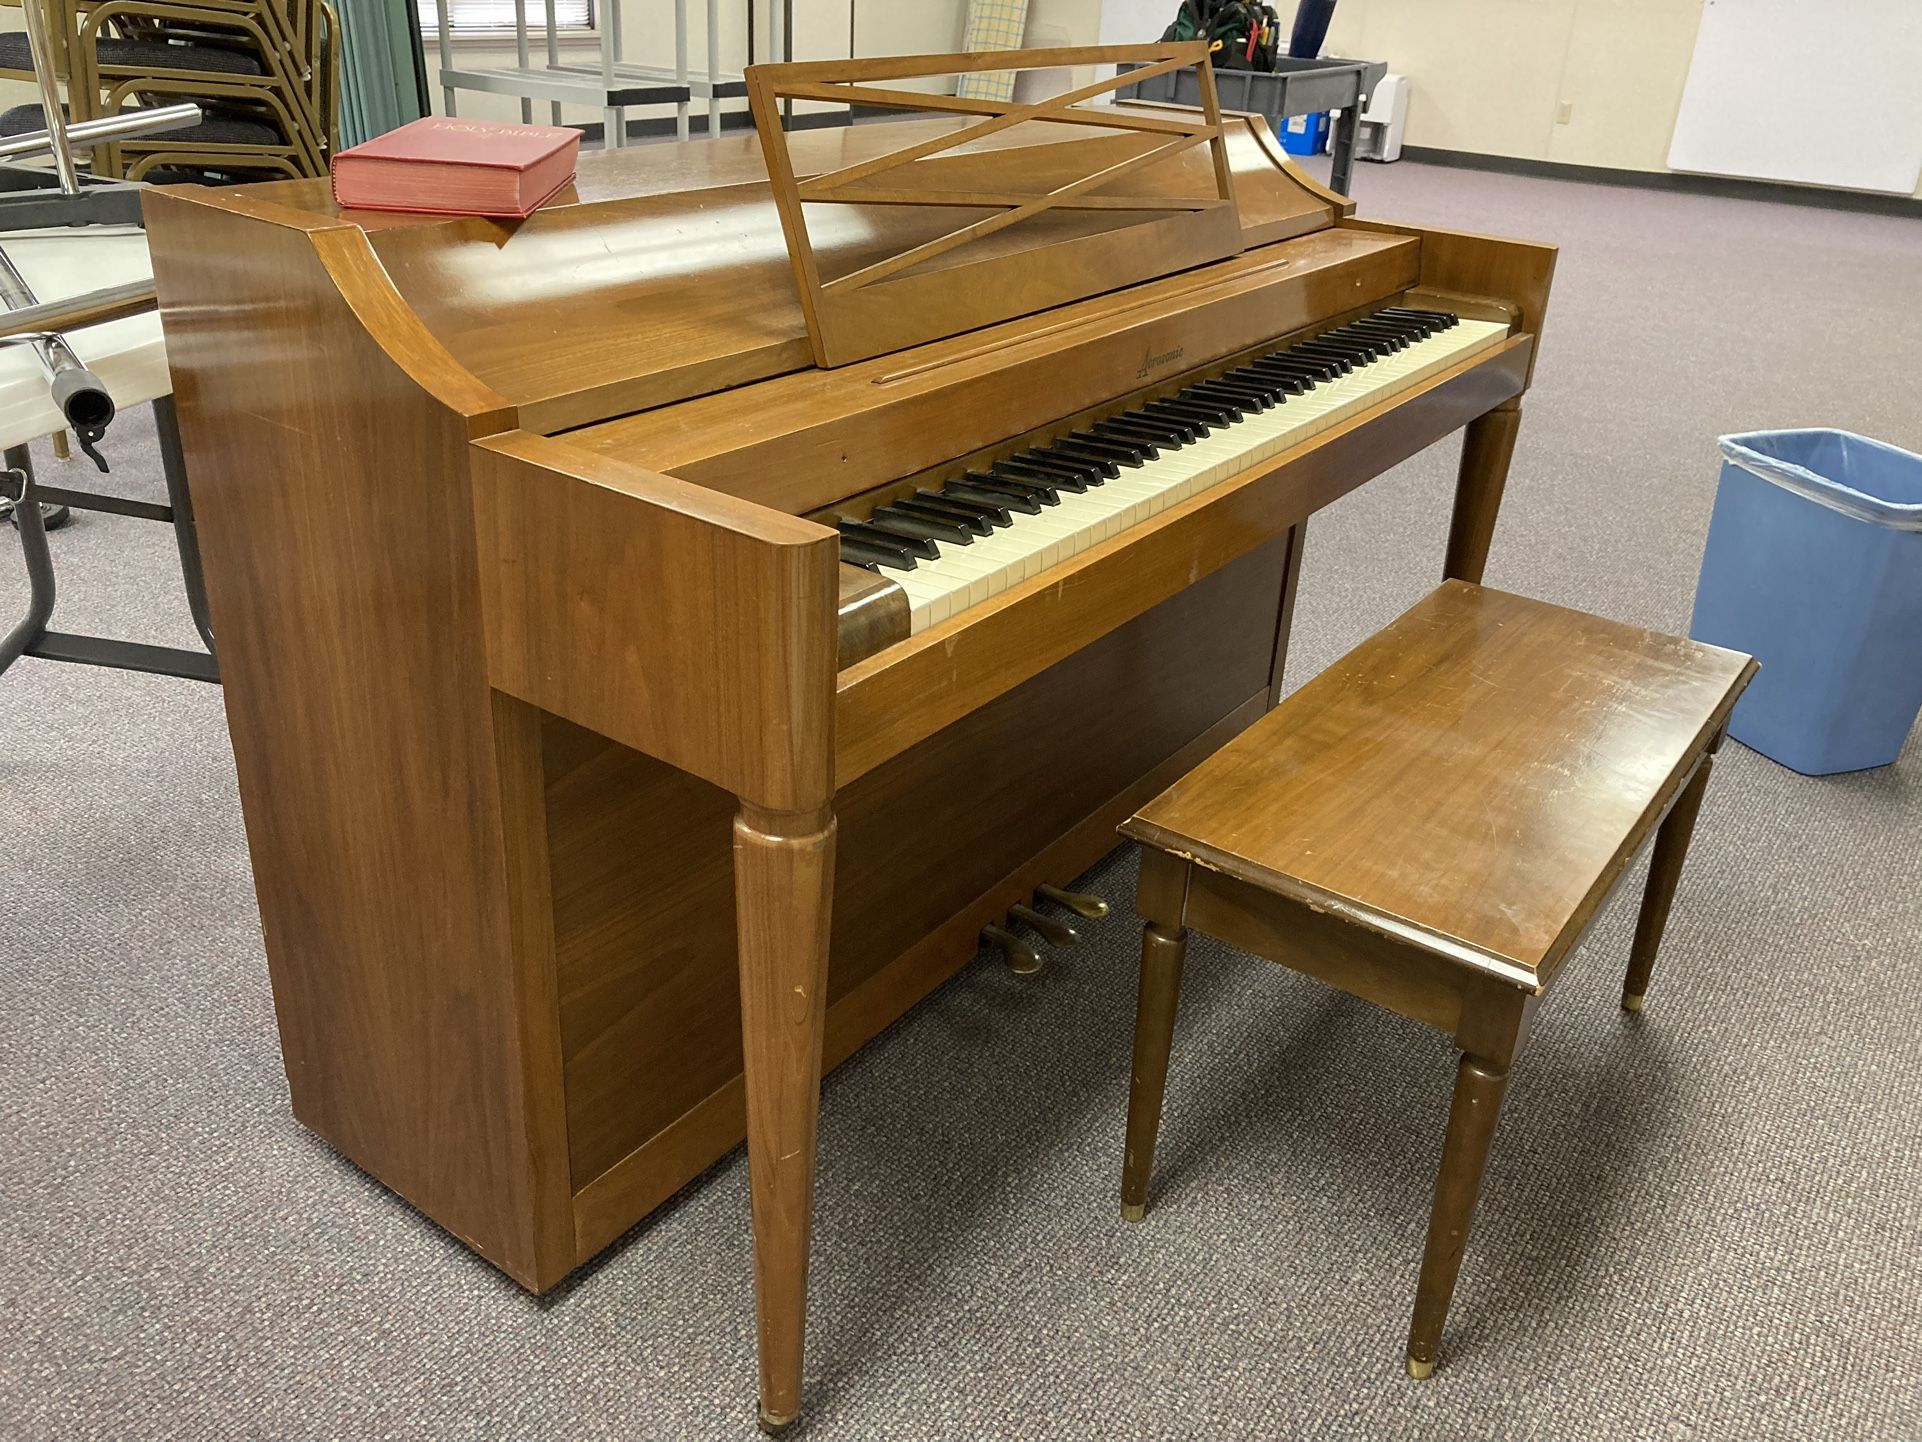 Baldwin Acrostic Upright Piano w/Bench—Needs Tuning—purchaser Must Arrange Piano to be Moved $100